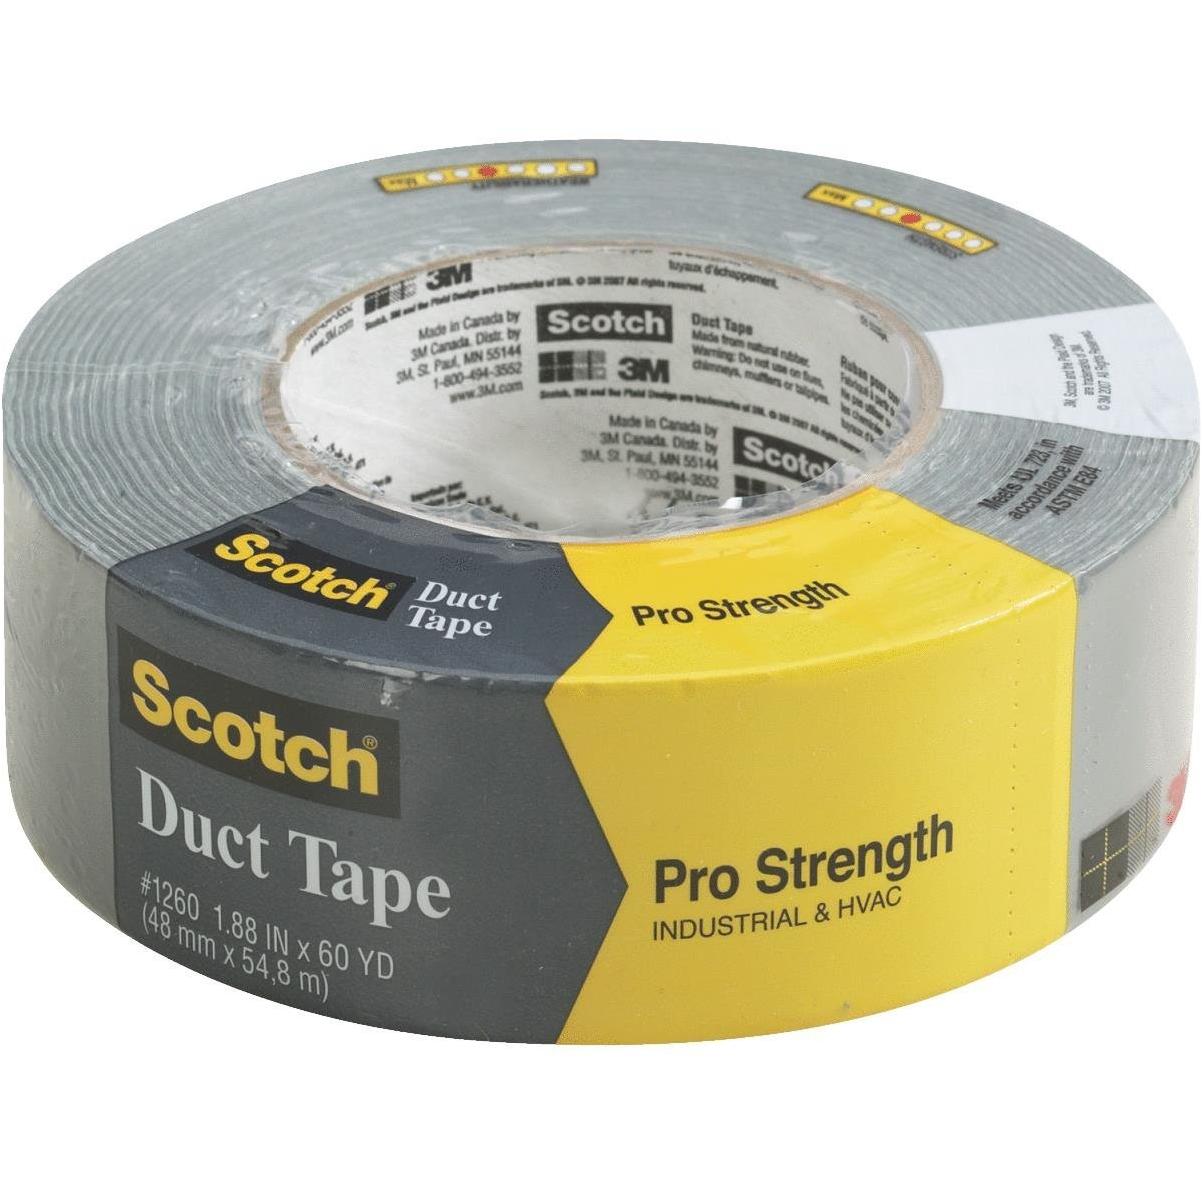 1210-A 1 Roll 3M Pro Strength Duct Tape Industrial HVAC 1.88 inches by 10 yards 